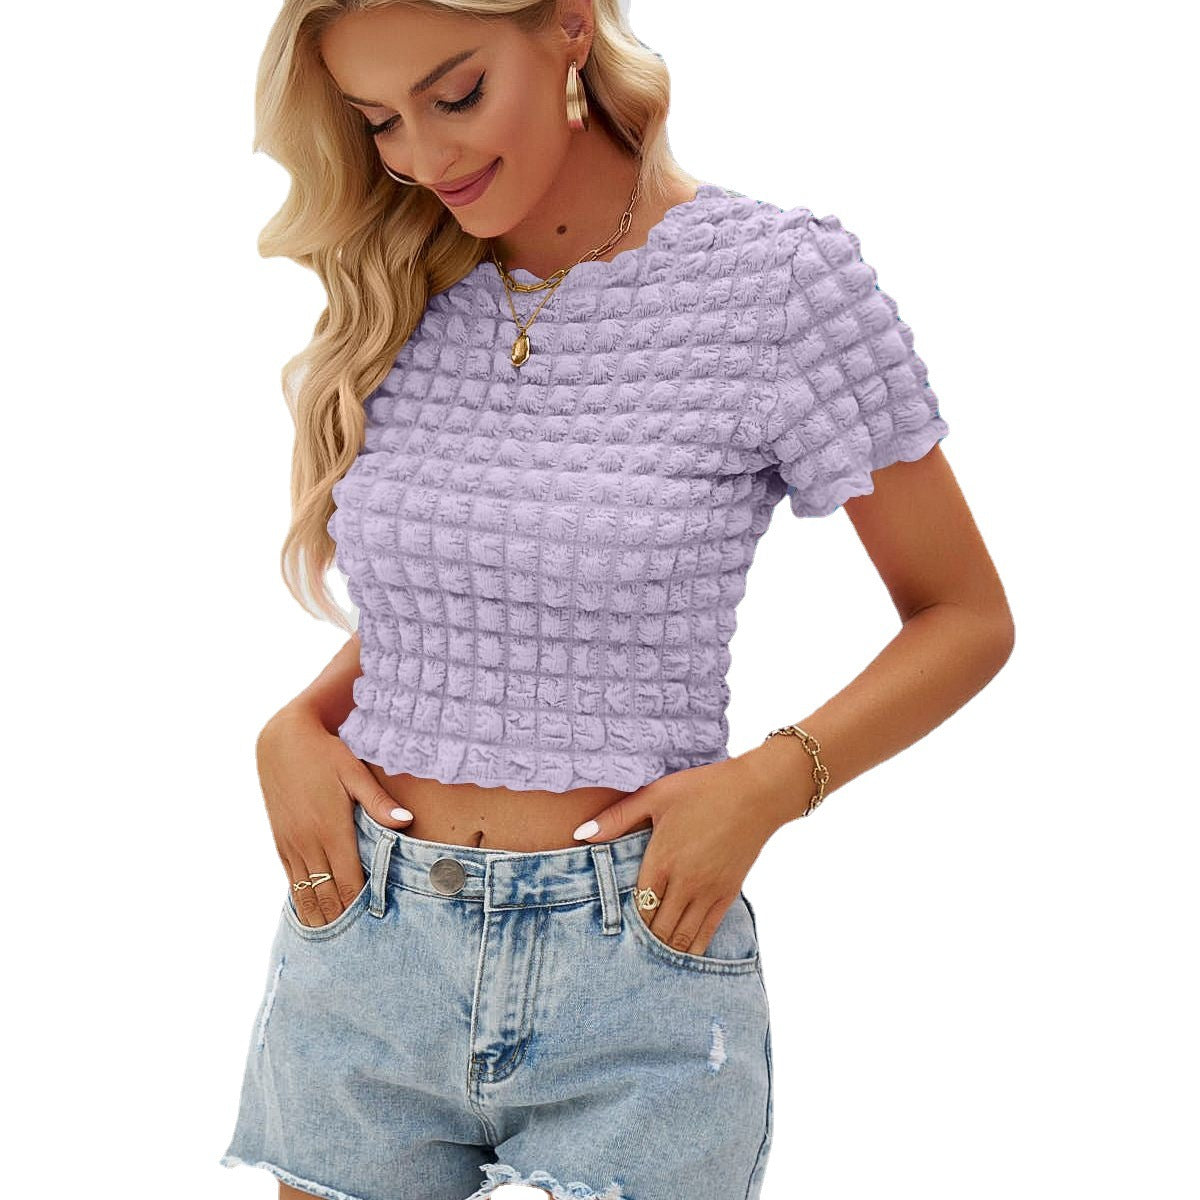 Street Sexy Popcorn Cropped Hot Girl Short Sleeve Top